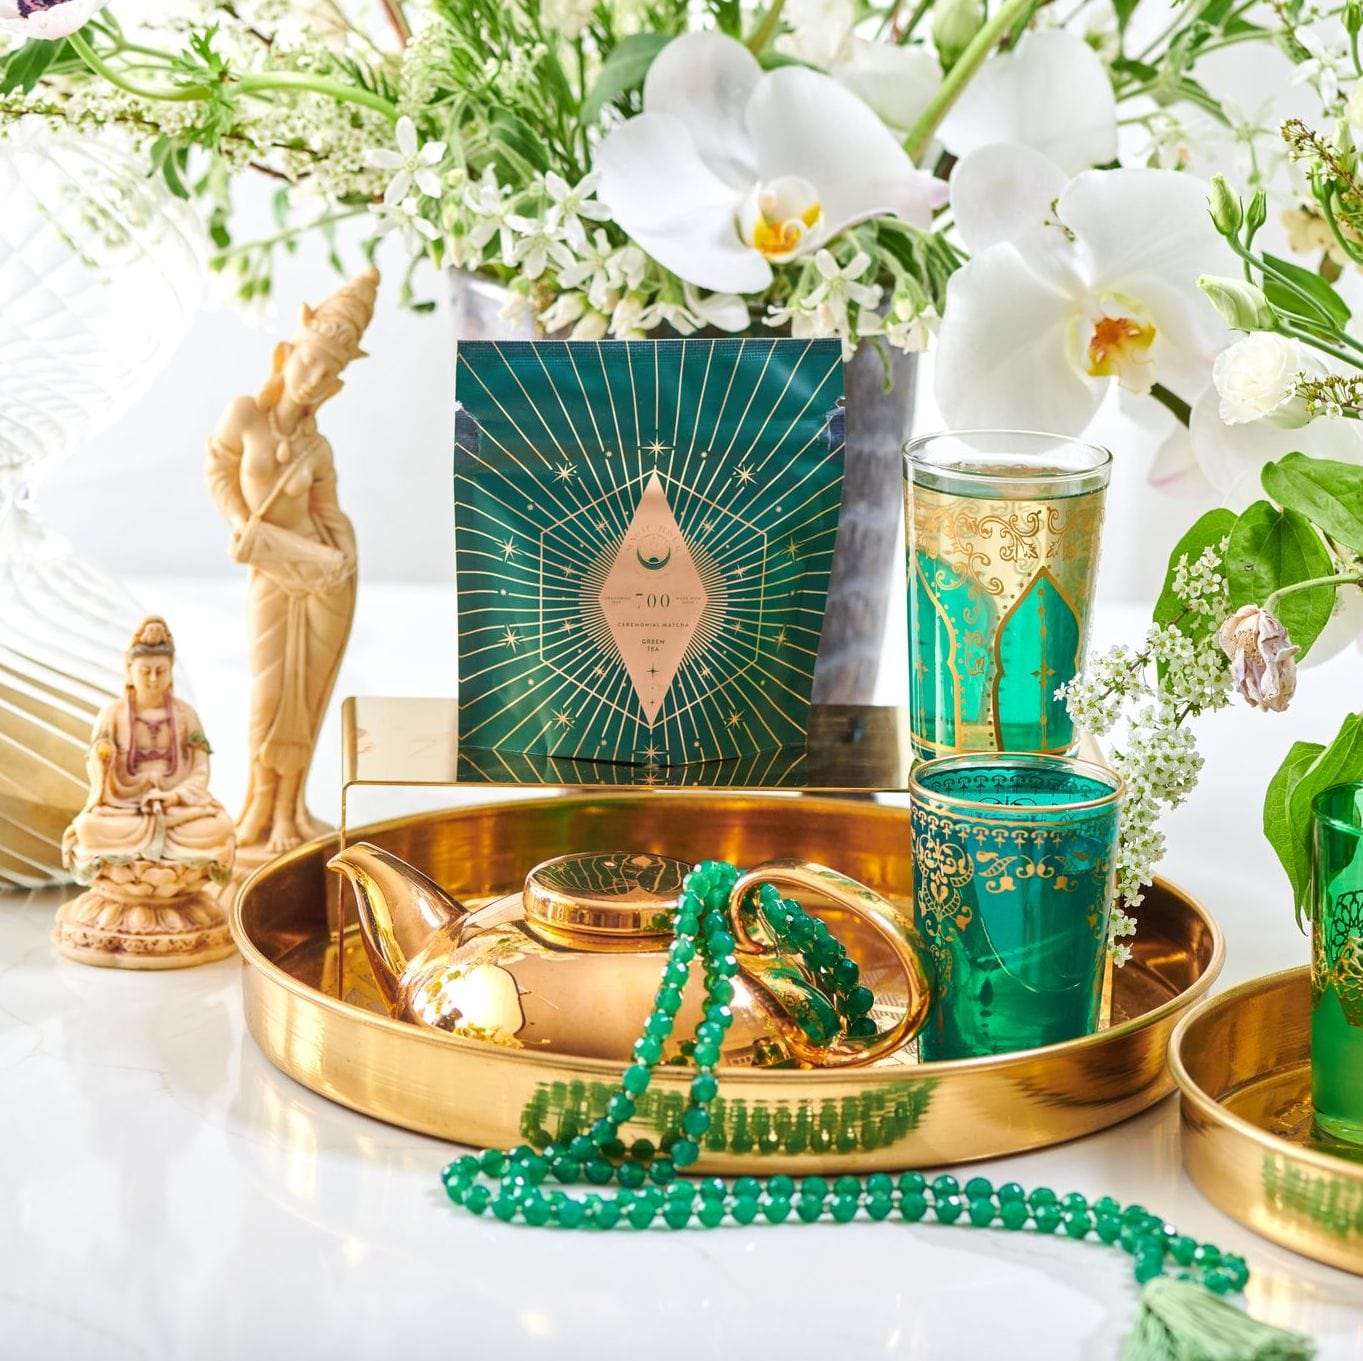 A decorative setup featuring a gold tray with a teapot, green beaded necklace, and ornate green cups. In the background are white flowers, greenery, a bag of Club Magic Hour Organic Ceremonial Matcha 700, and two statuettes of women. The organic tea enhances the fresh ambiance.